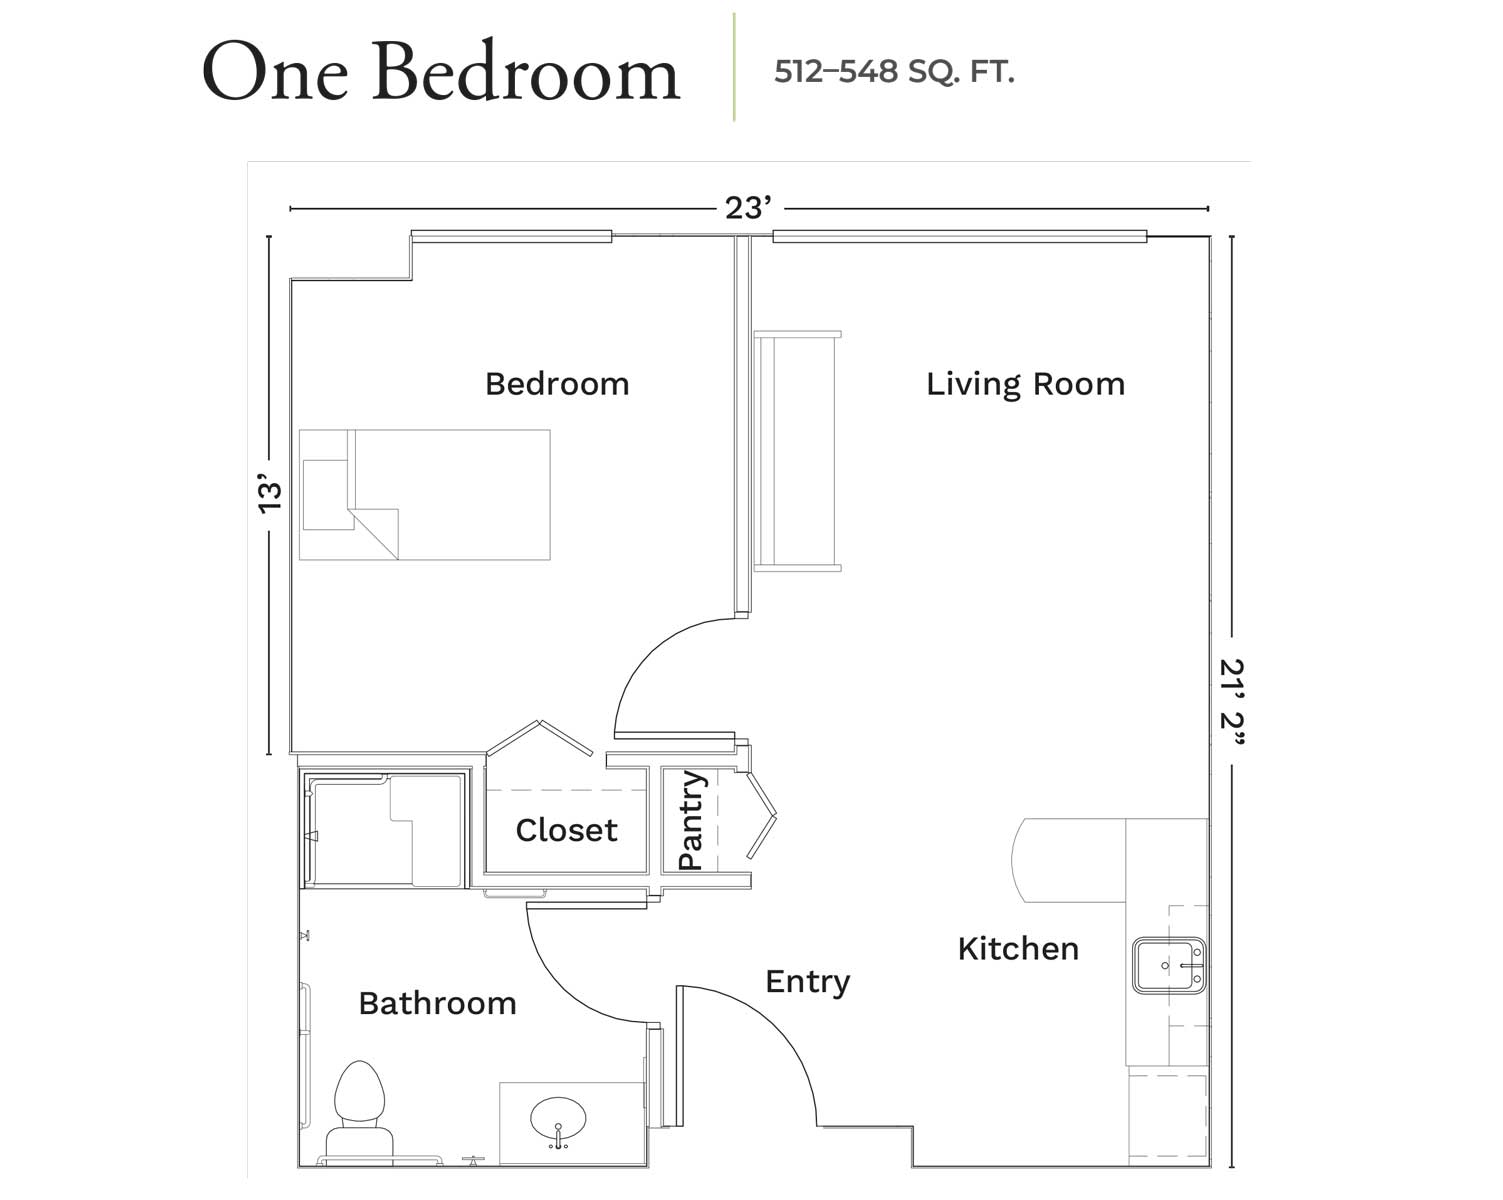 One-bedroom apartment floor plan showing layout of rooms and dimensions